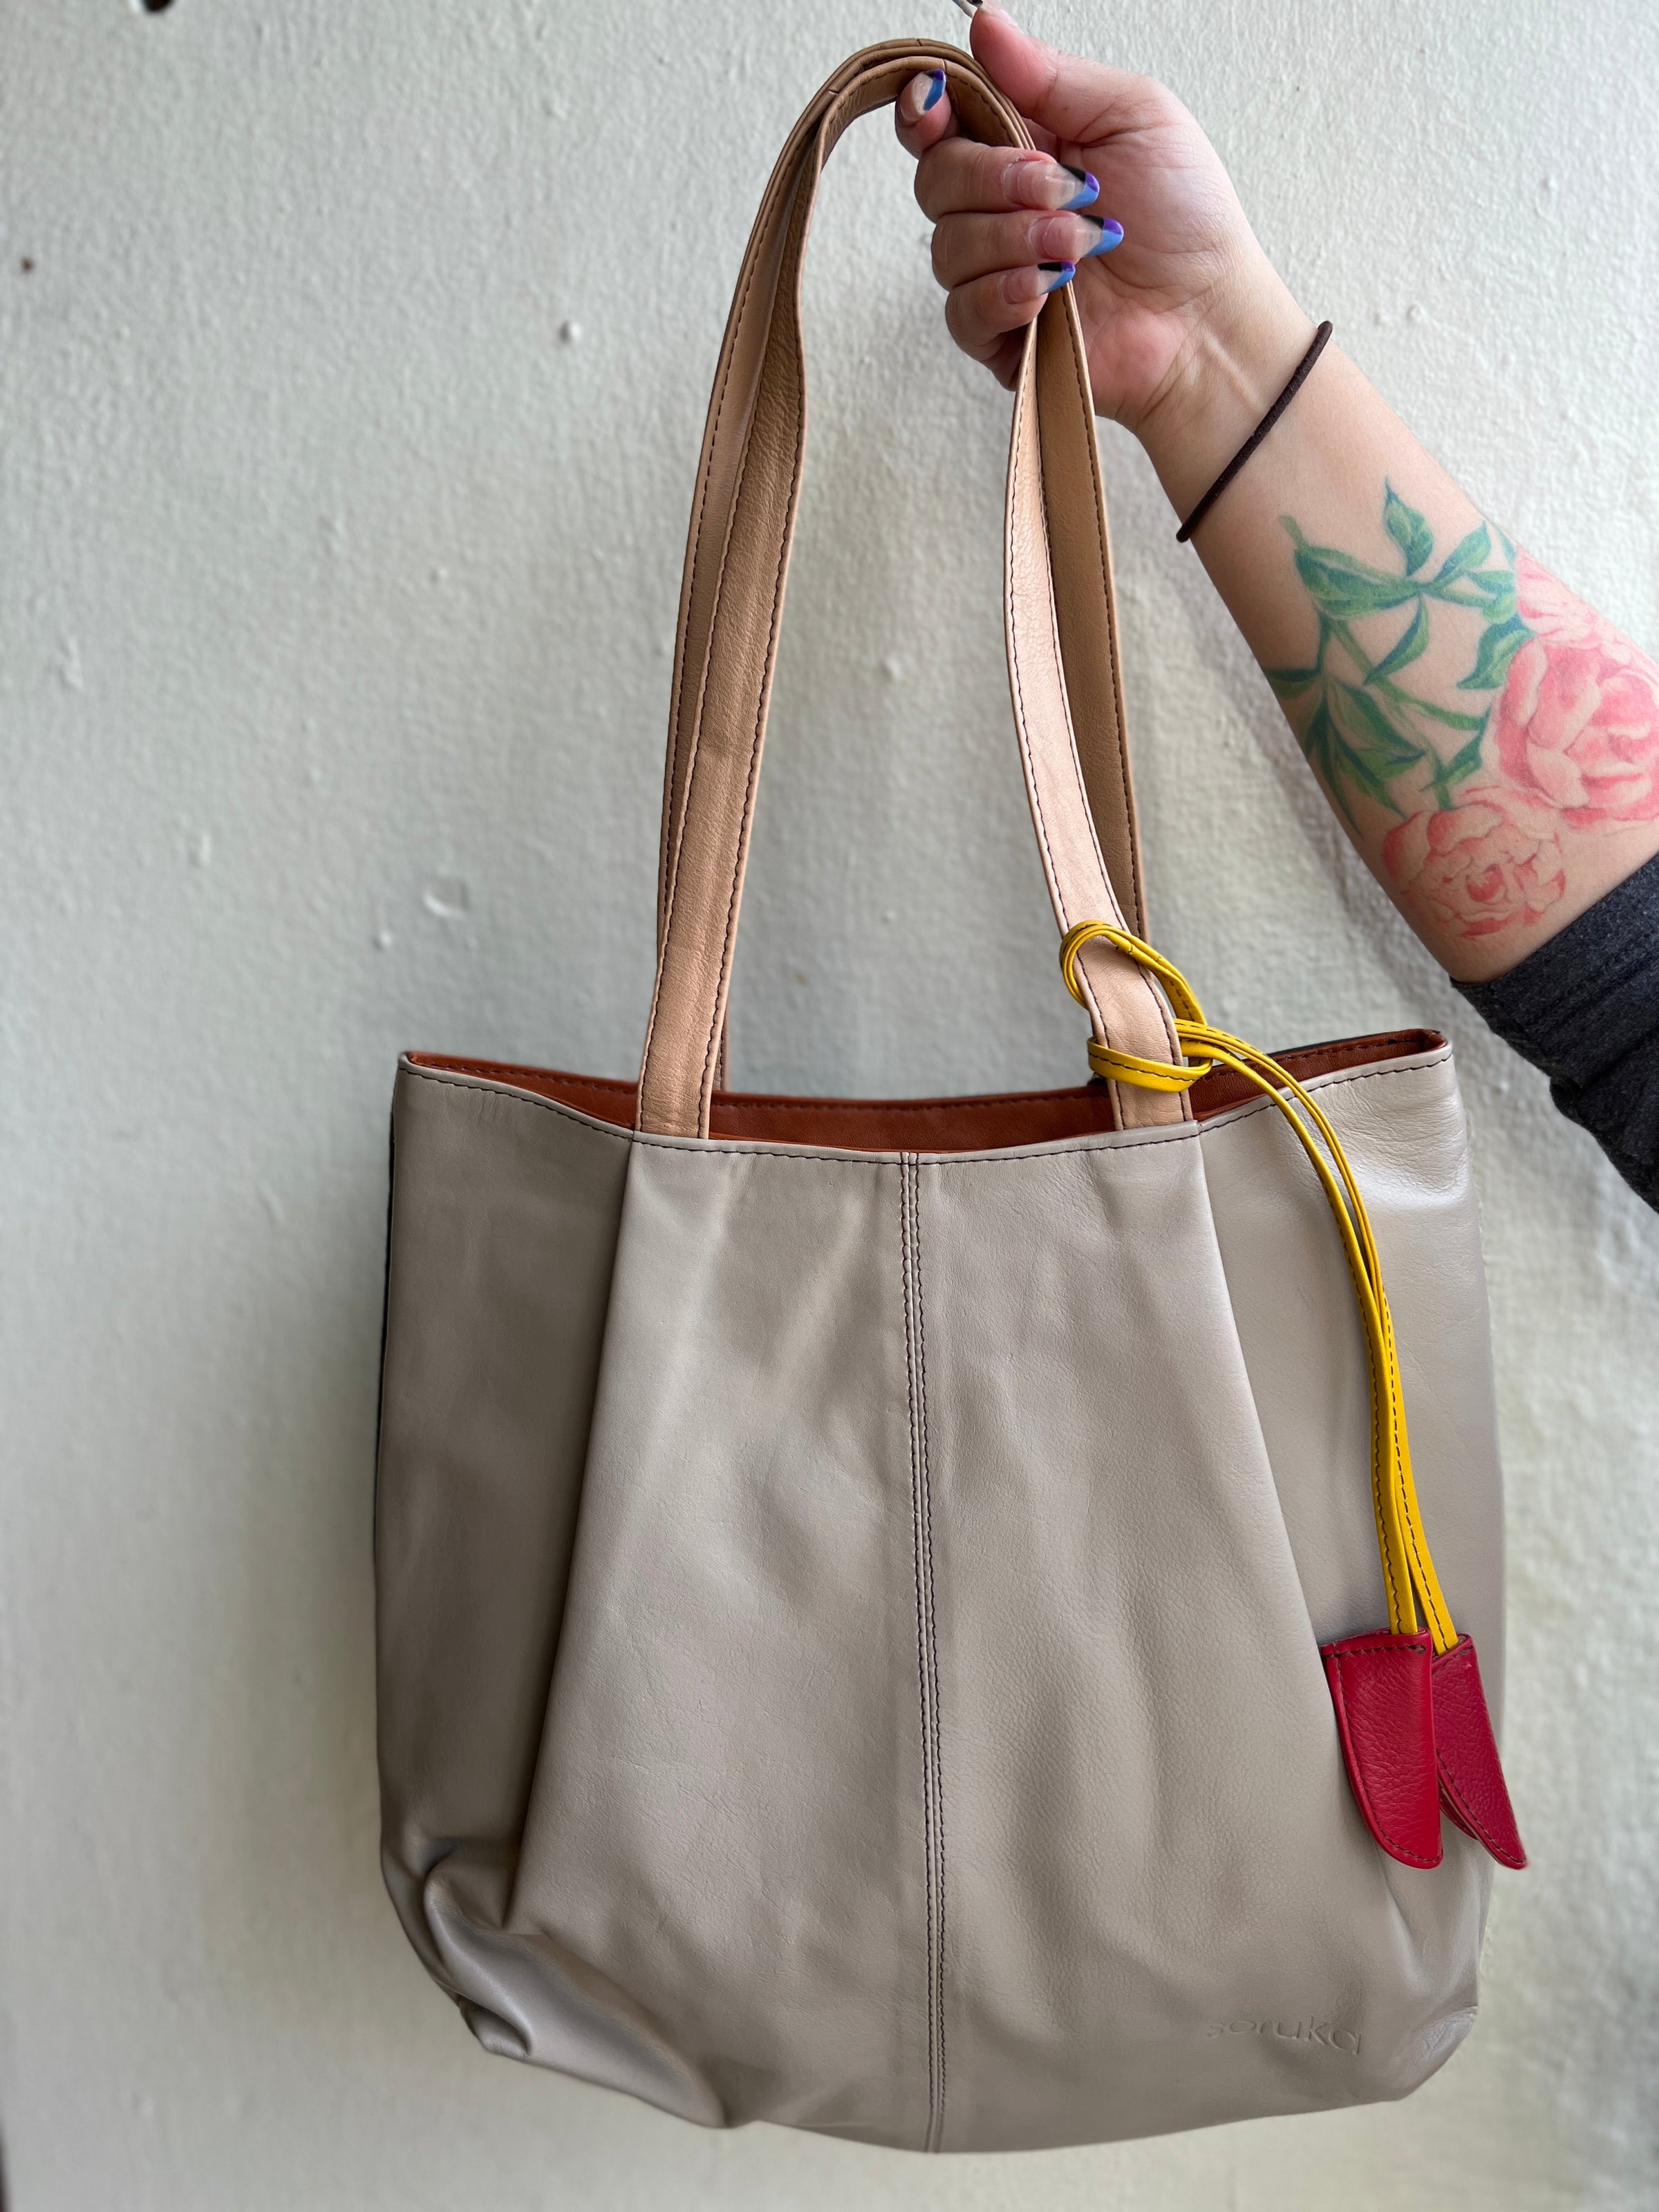 Celine Leather Bag - Soruka Sustainable, Handcrafted Recycled